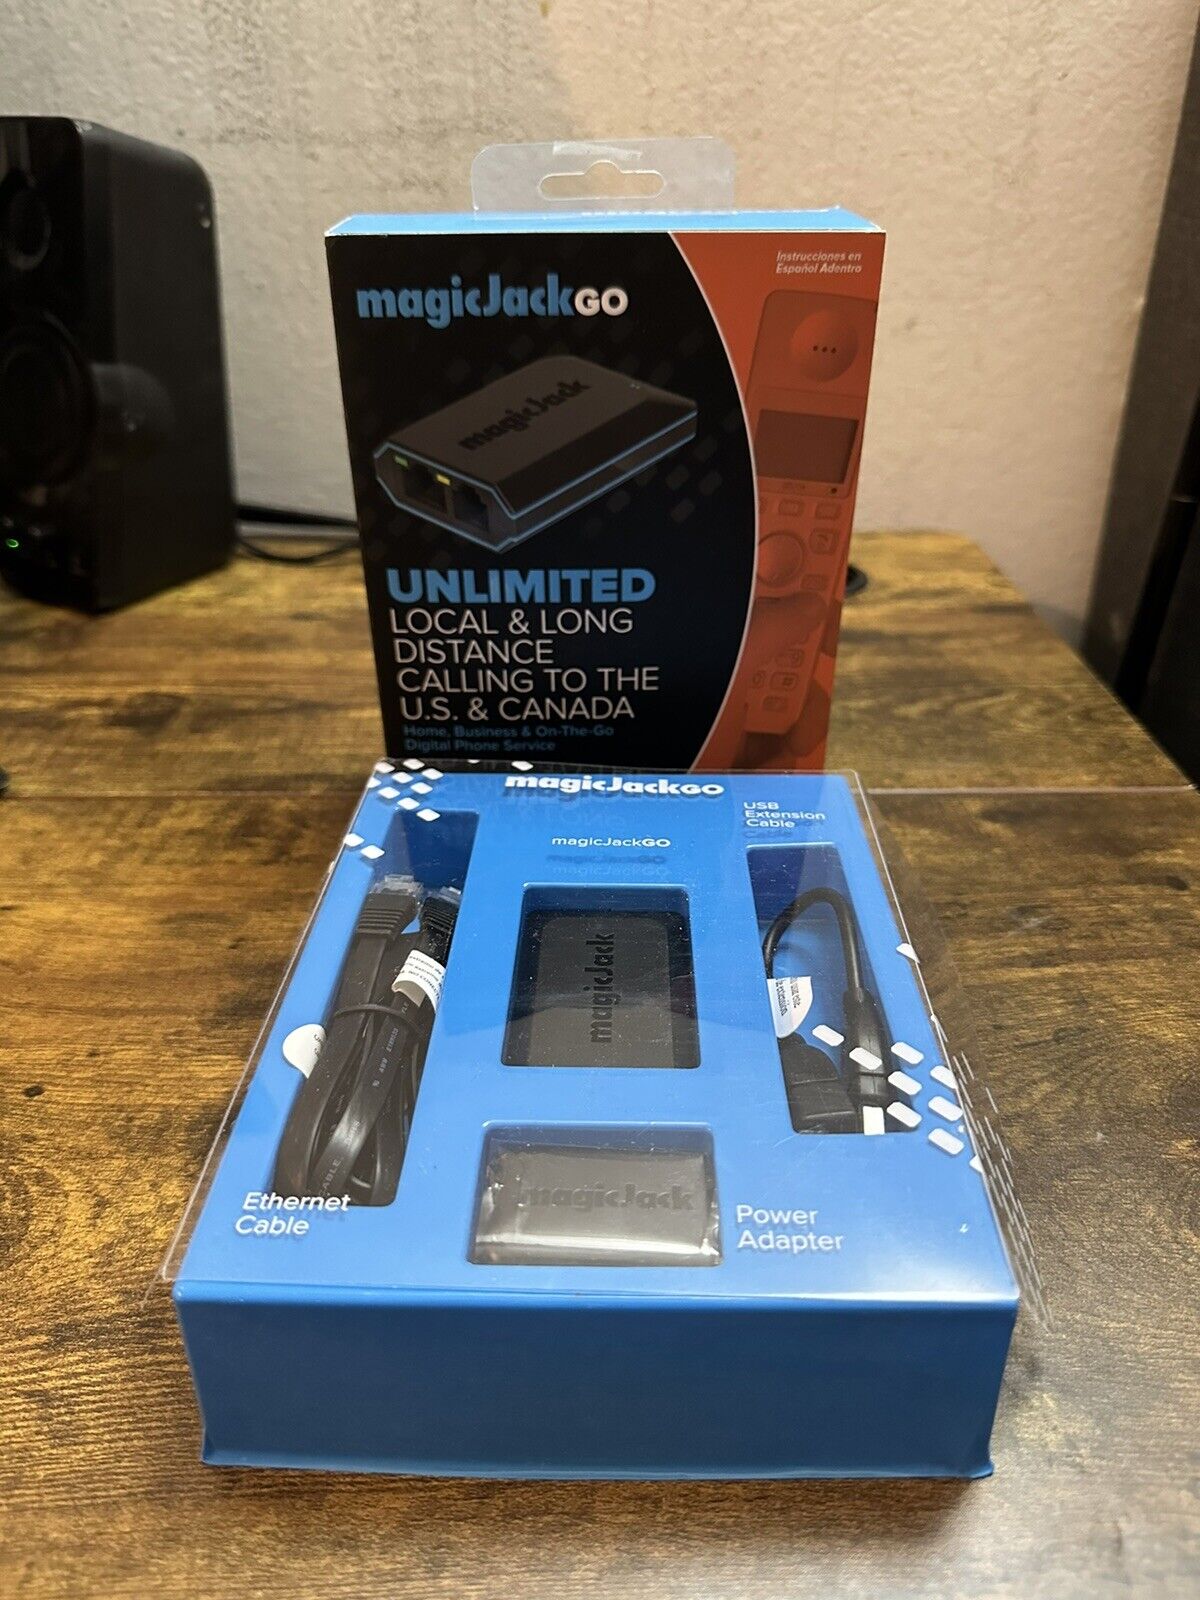 MAGIC JACK GO Smart Home/Business On The Go Digital Phone Service With Adapter